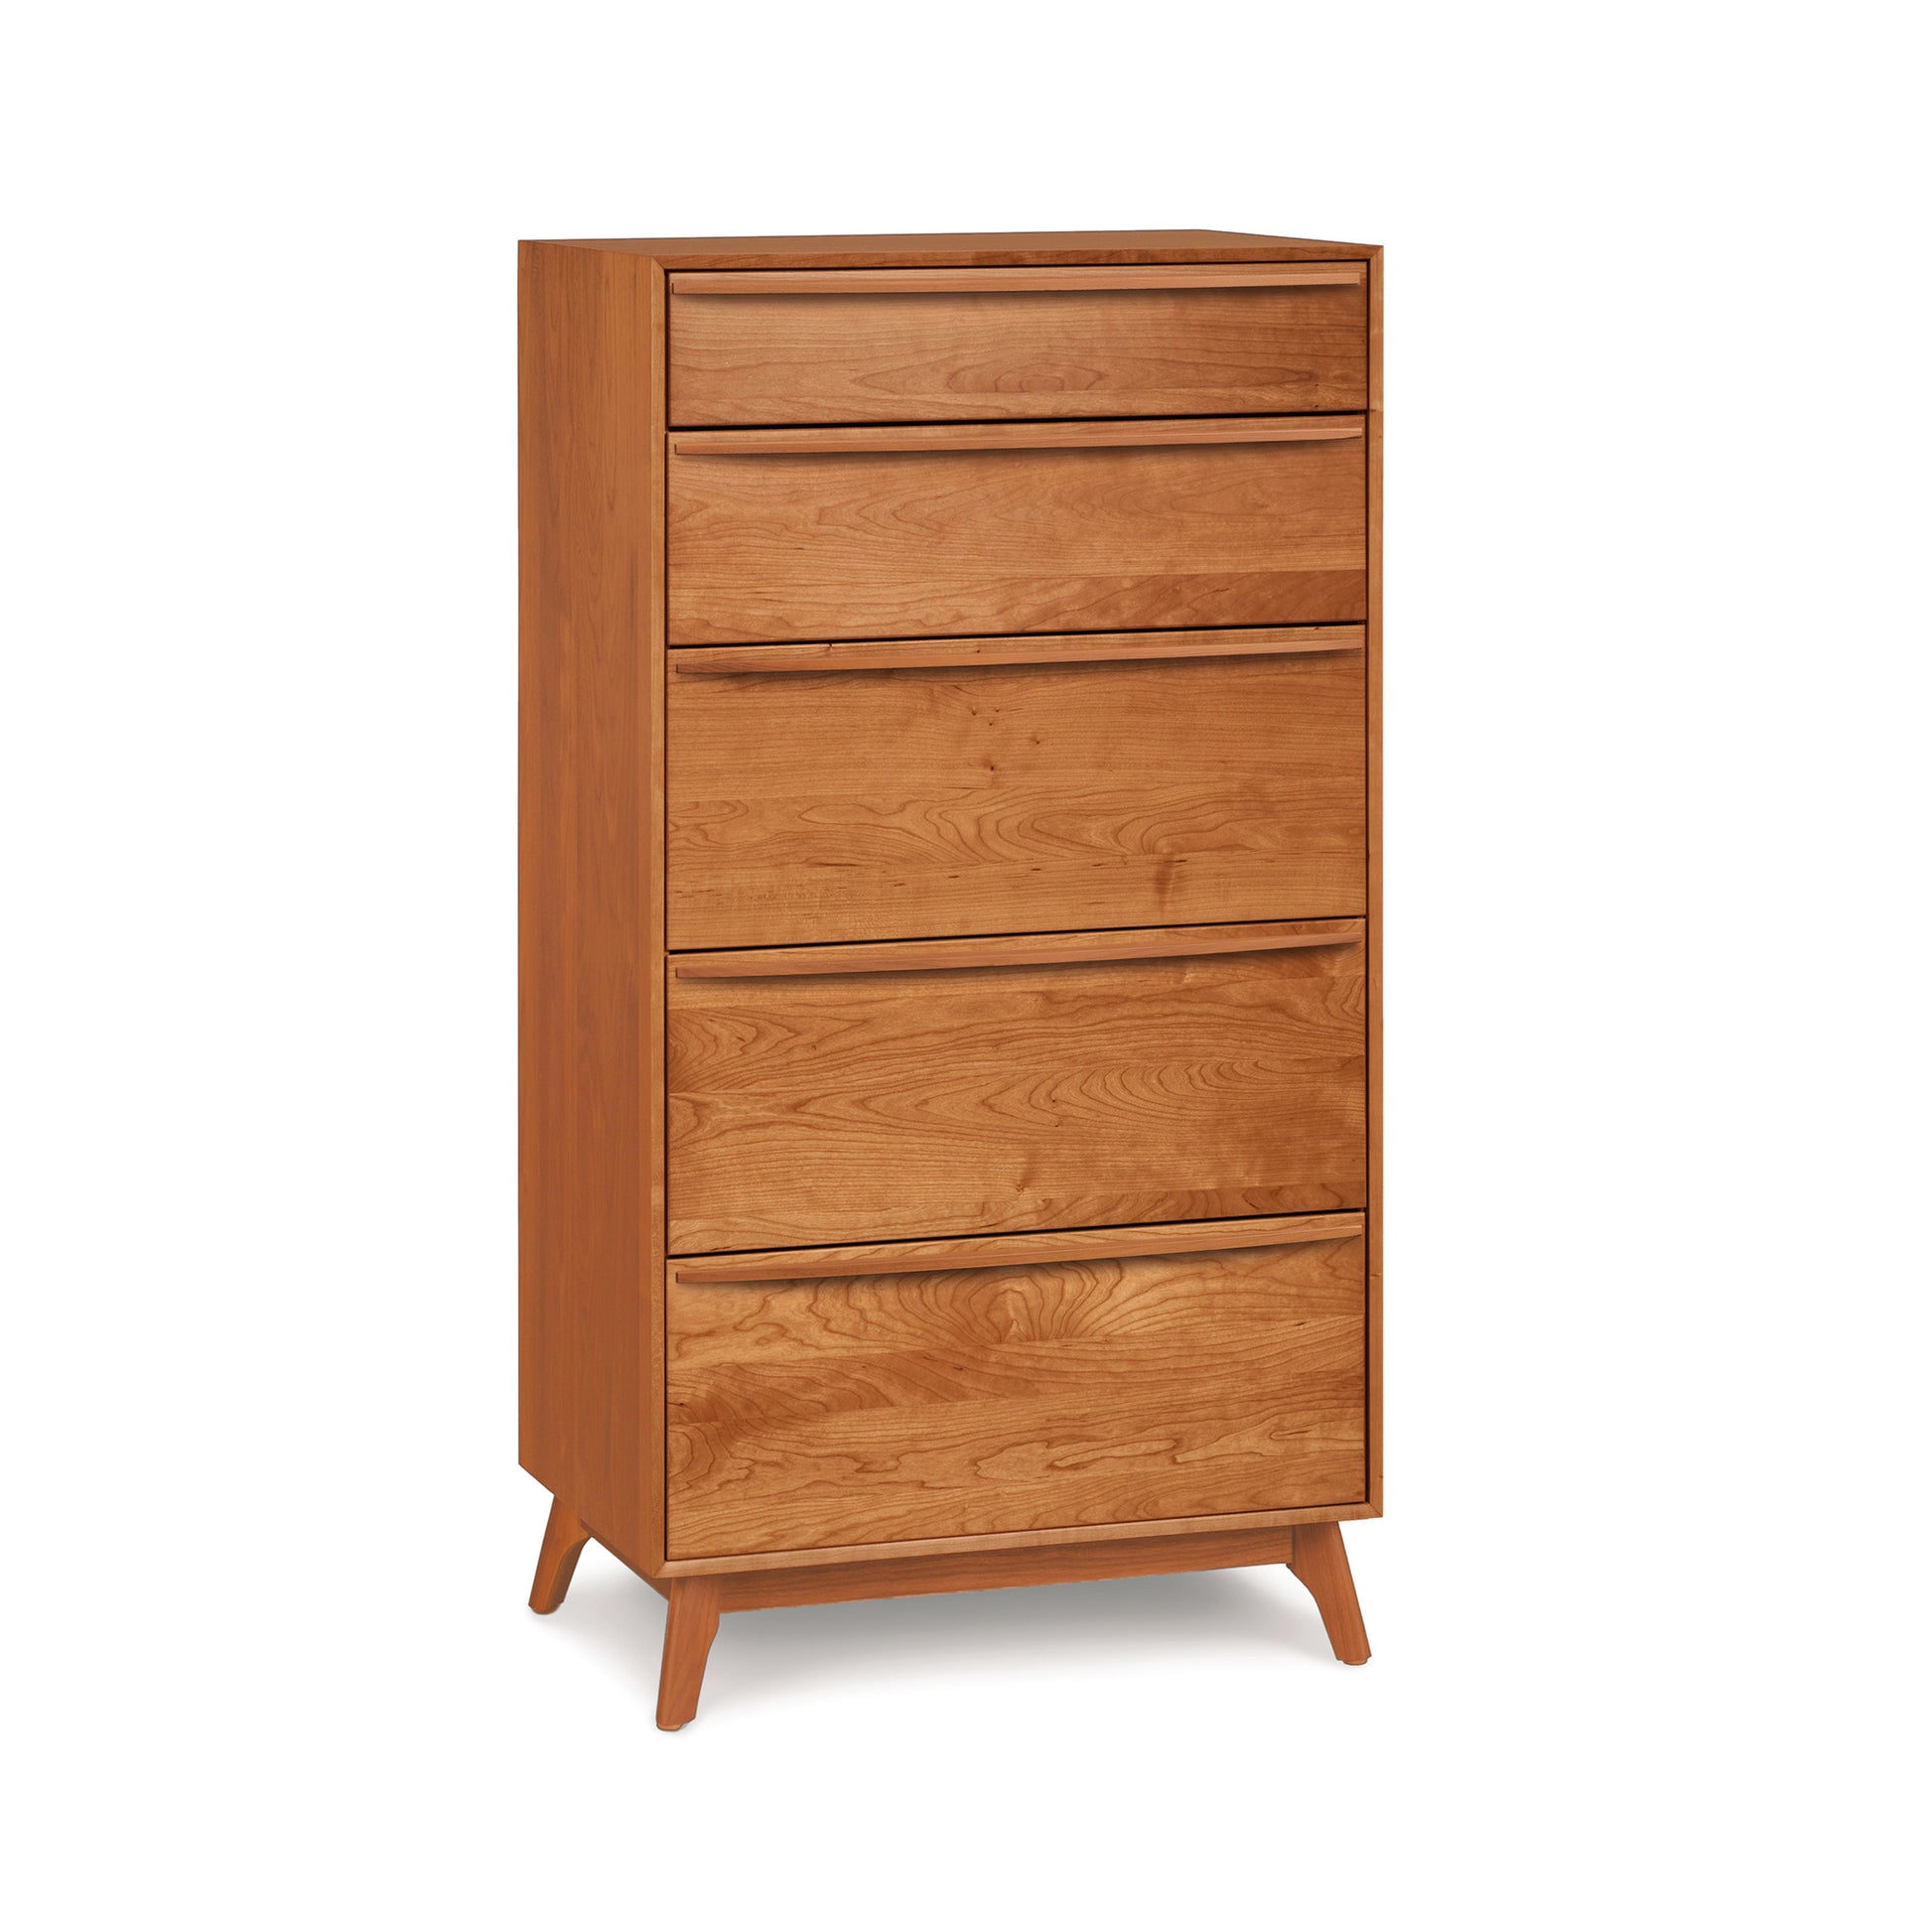 The Copeland Furniture Catalina 5-Drawer Chest, with its solid wood construction, is a stylish addition to any bedroom furniture set. It features a wooden chest of drawers on a white background.